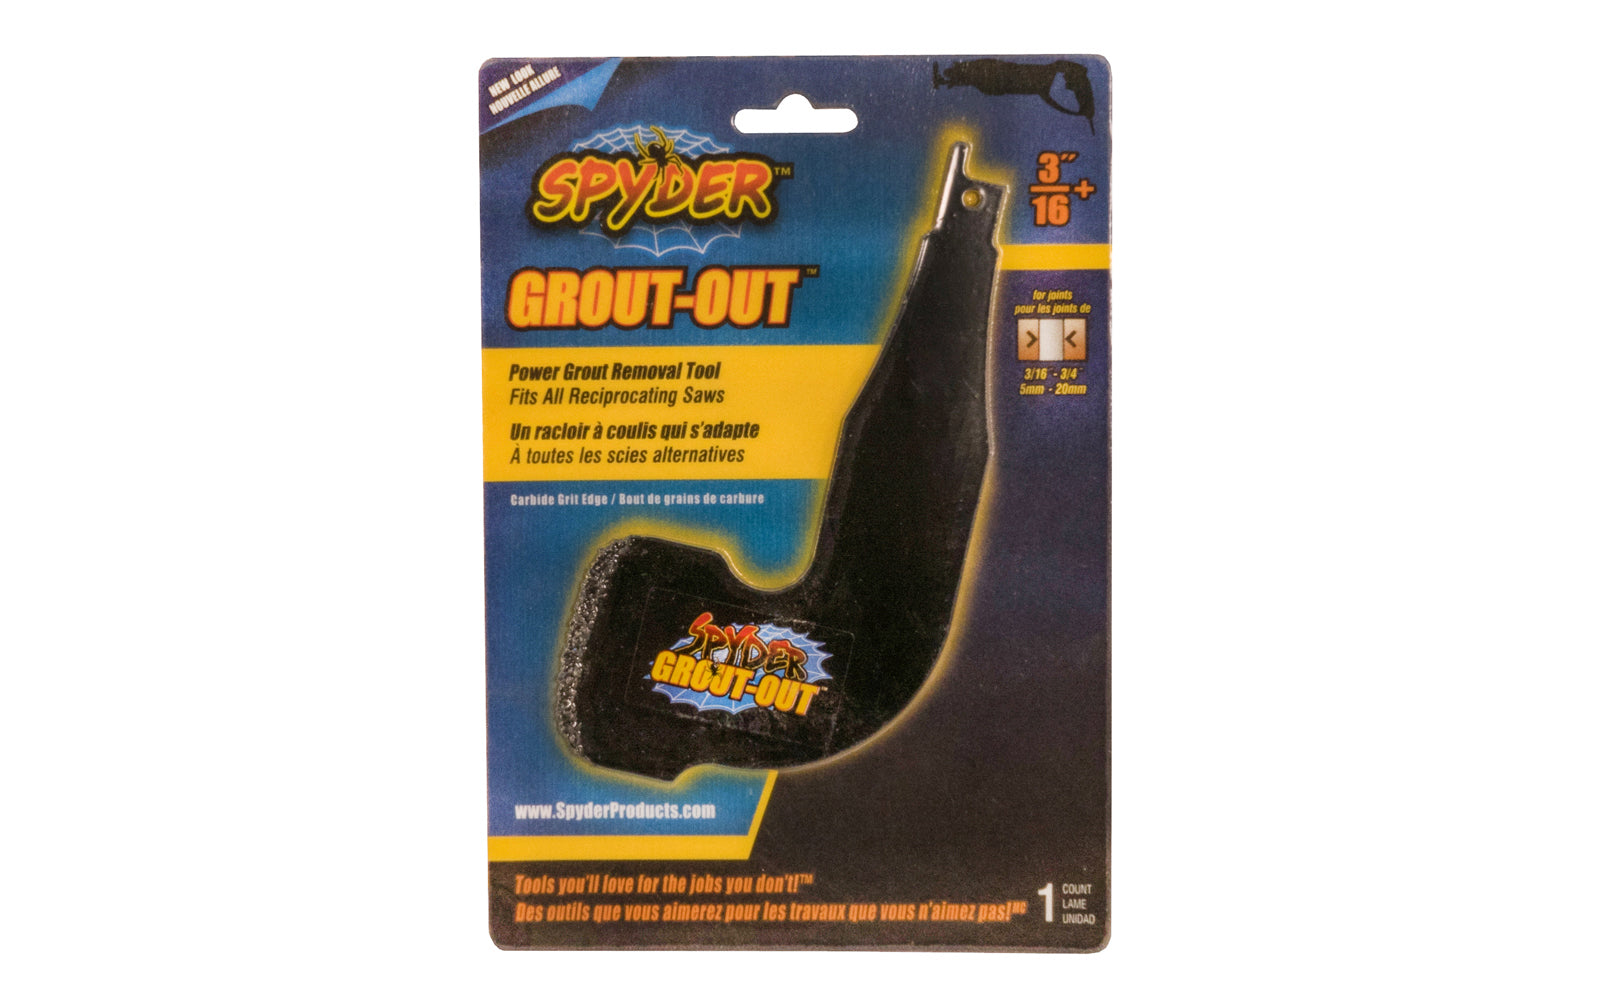 This Spyder "Grout Out" blade is a power grout removal tool for reciprocating saws. Carbide grit edge, 3/16" Thick. Designed for 3/16" to 3/4" joints. 884835000578